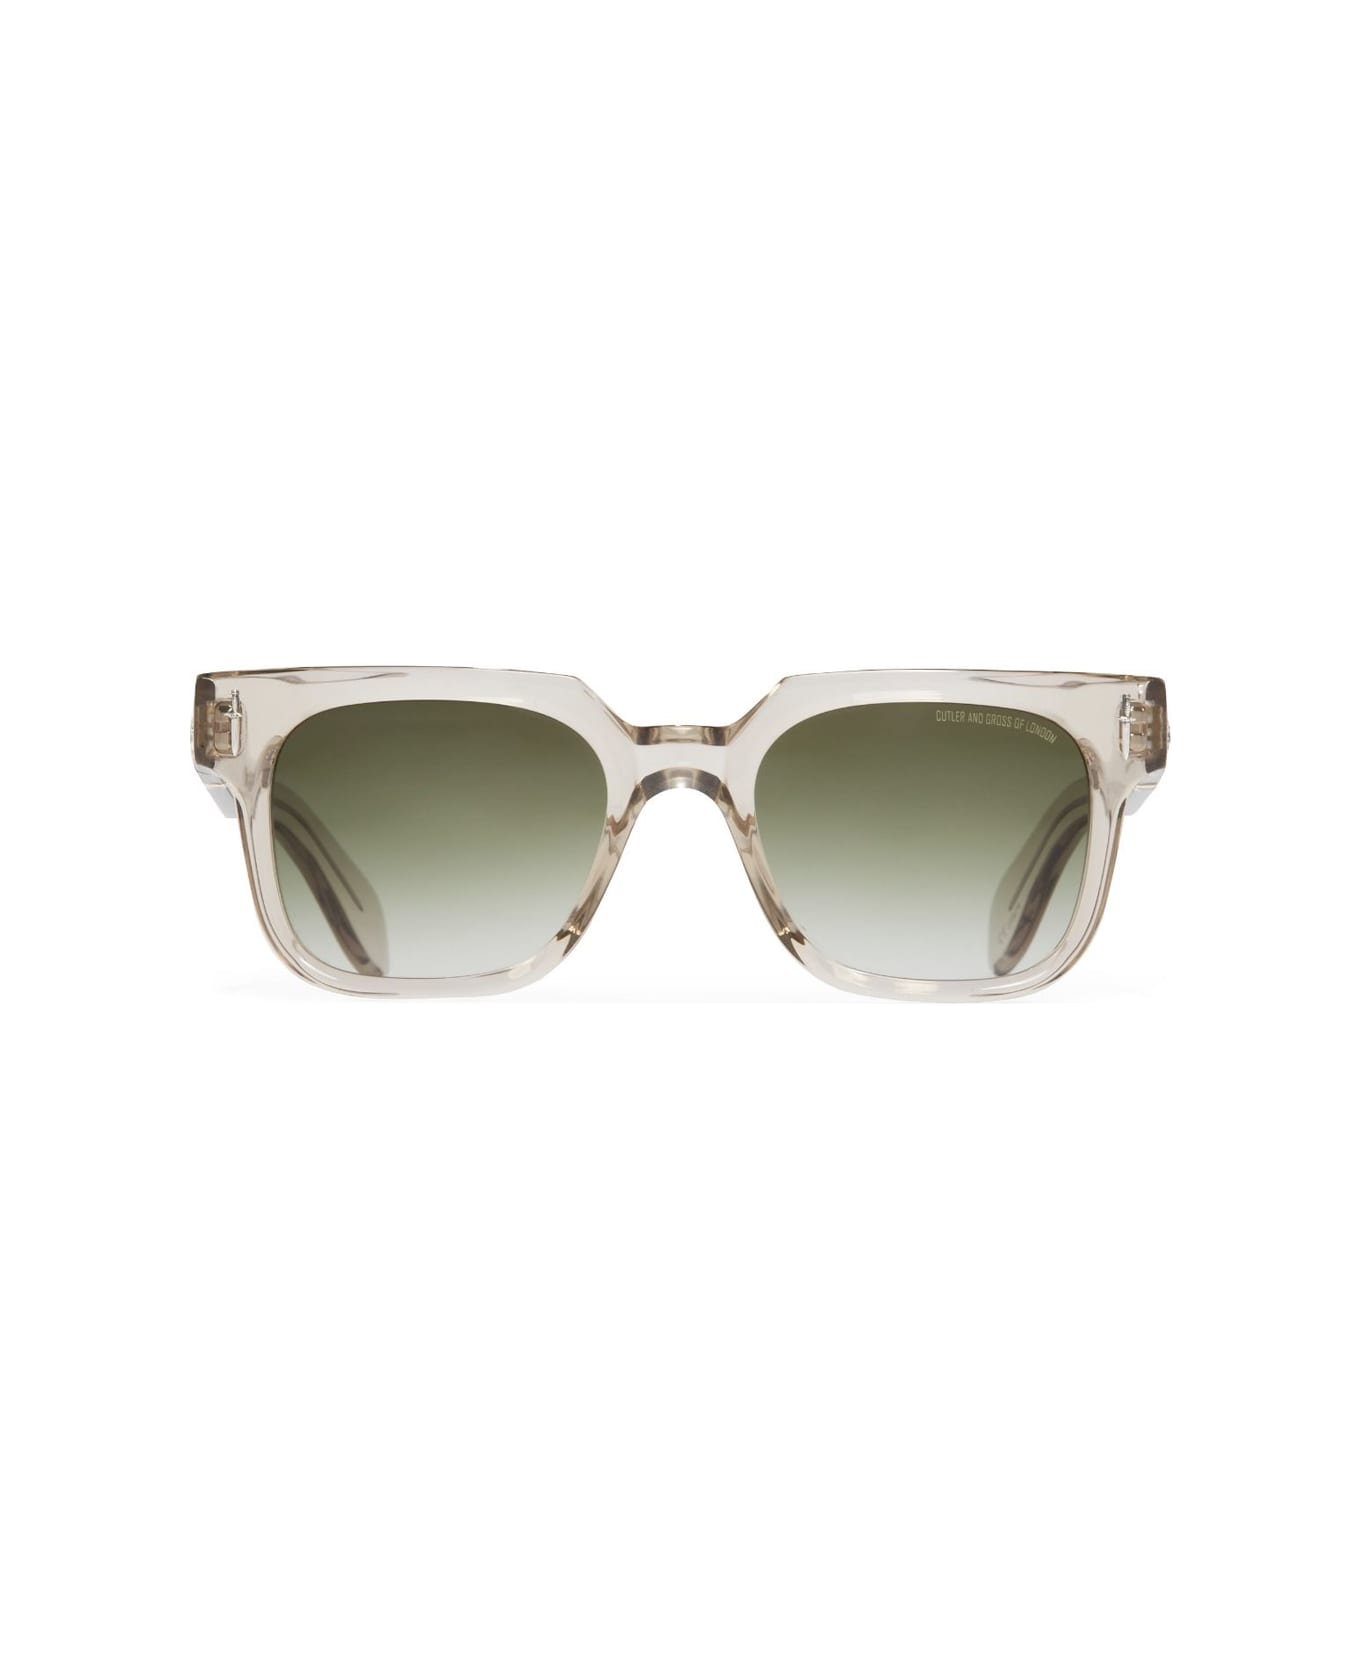 Cutler and Gross The Great Frog 007 03 Sand Crystal Sunglasses - Beige